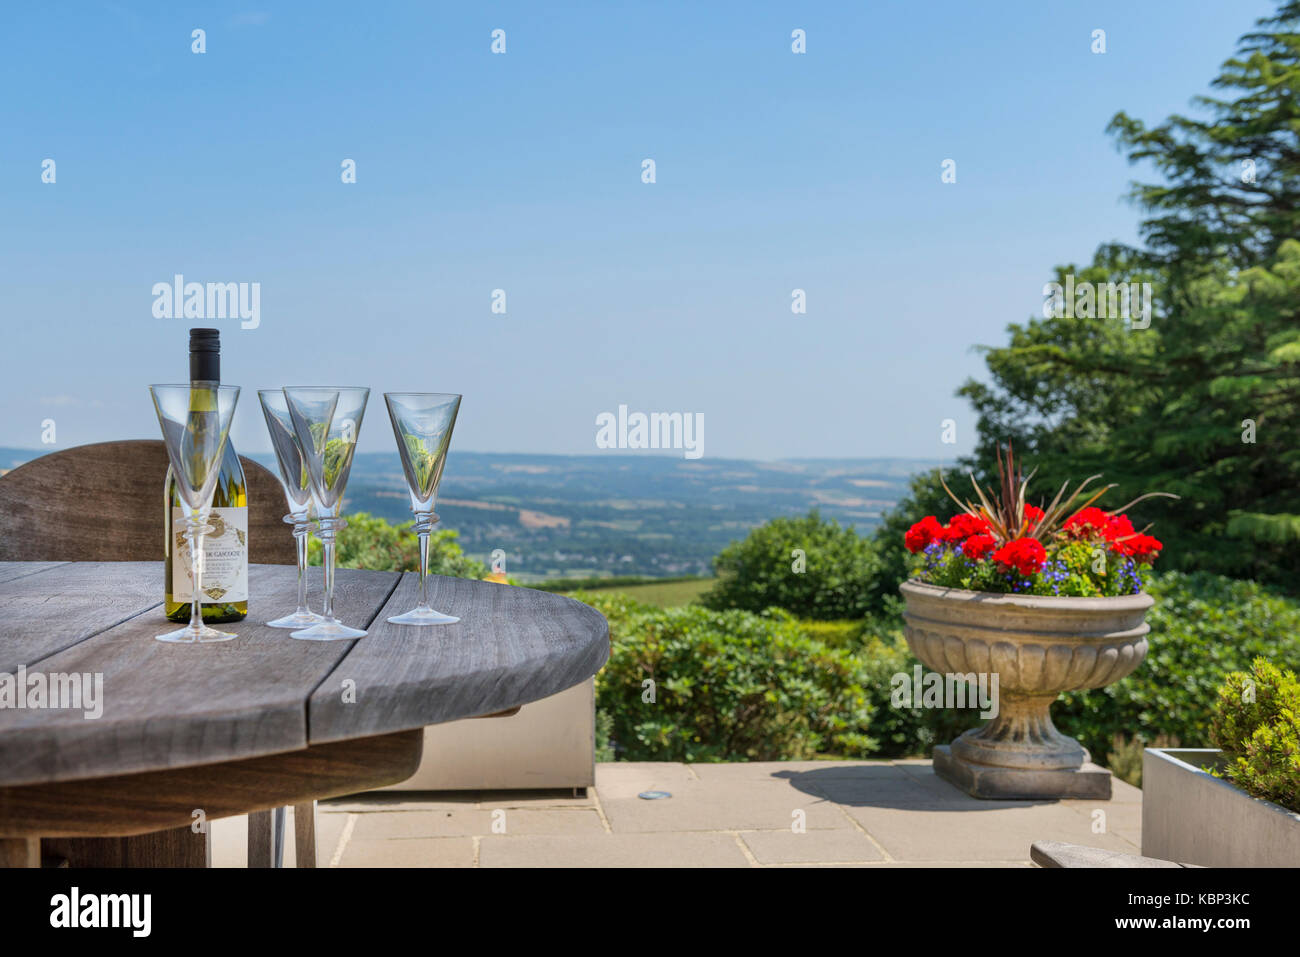 Wine bottle and glasses sit on a wooden garden table against a stunning view across Dartmoor in Devon on a sunny summer's day. Seafood Coast Stock Photo